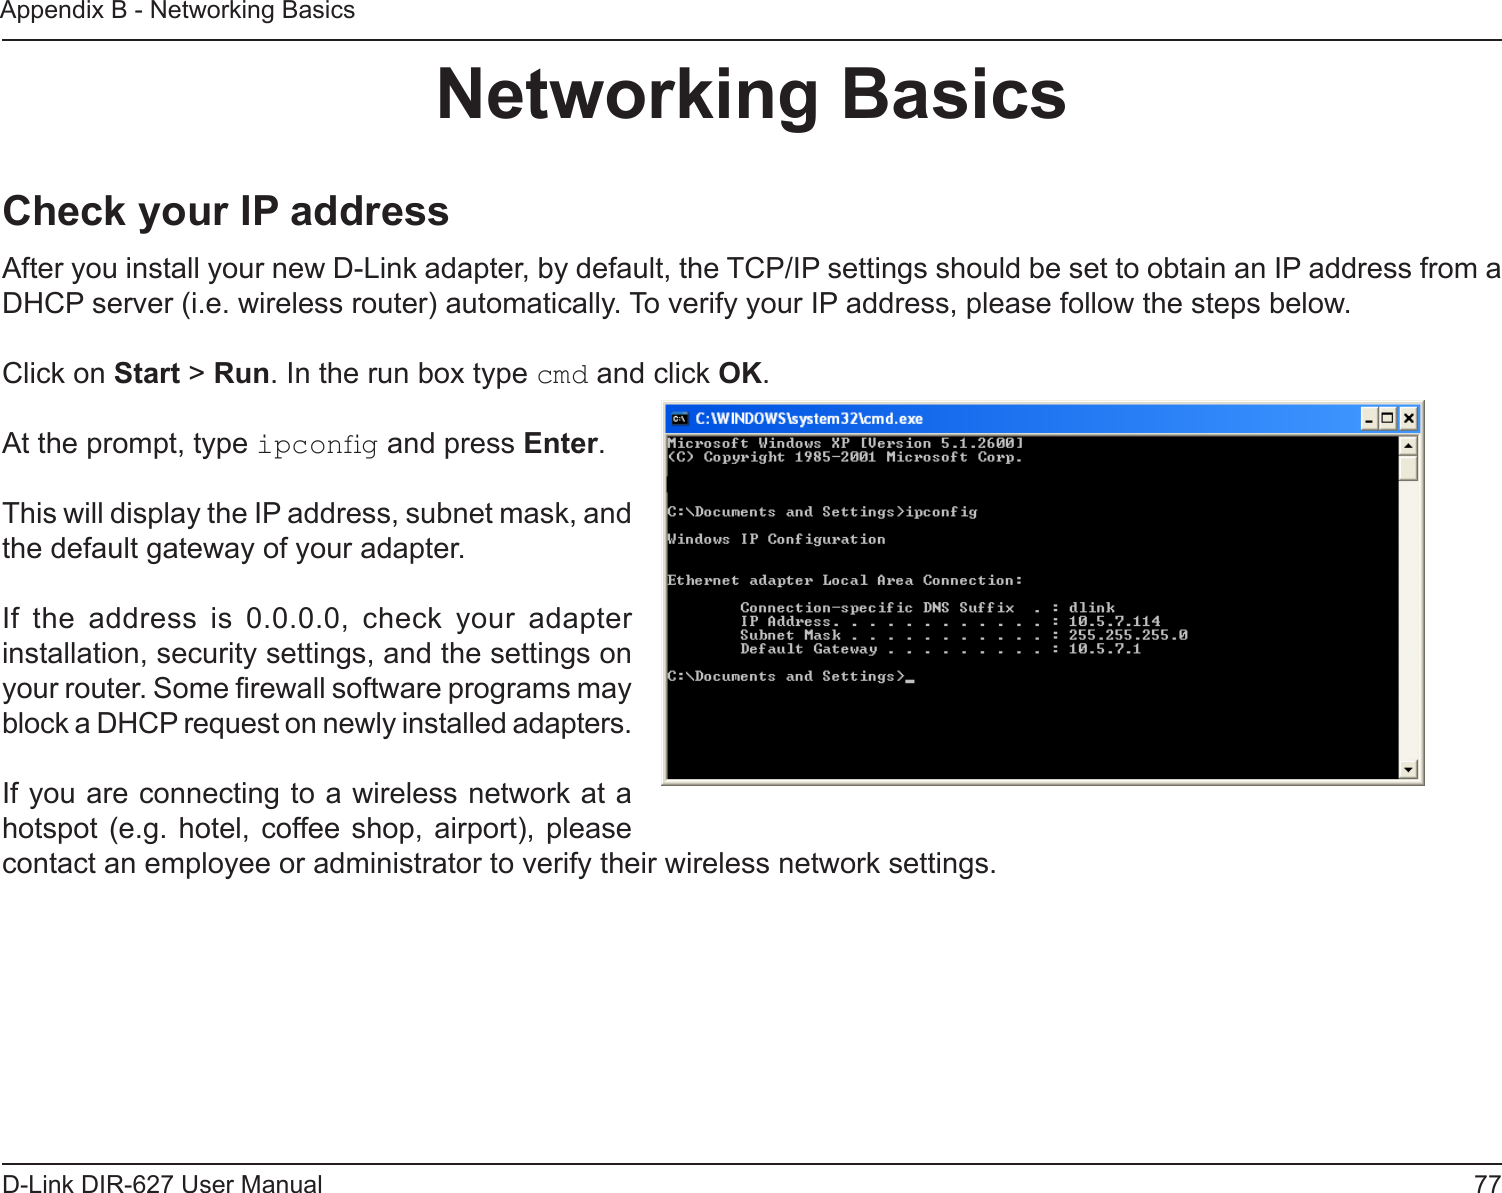 77D-Link DIR-627 User ManualAppendix B - Networking BasicsNetworkingBasicsCheckyourIPaddressAfter you install your new D-Link adapter, by default, the TCP/IP settings should be set to obtain an IP address from a DHCP server (i.e. wireless router) automatically. To verify your IP address, please follow the steps below.Click on Start &gt; Run. In the run box type cmd and click OK.At the prompt, type ipcong and press Enter.This will display the IP address, subnet mask, and the default gateway of your adapter.If  the  address  is  0.0.0.0,  check  your  adapter installation, security settings, and the settings on your router. Some rewall software programs may block a DHCP request on newly installed adapters. If you are connecting to a wireless network at a hotspot (e.g. hotel,  coffee shop, airport), please contact an employee or administrator to verify their wireless network settings.